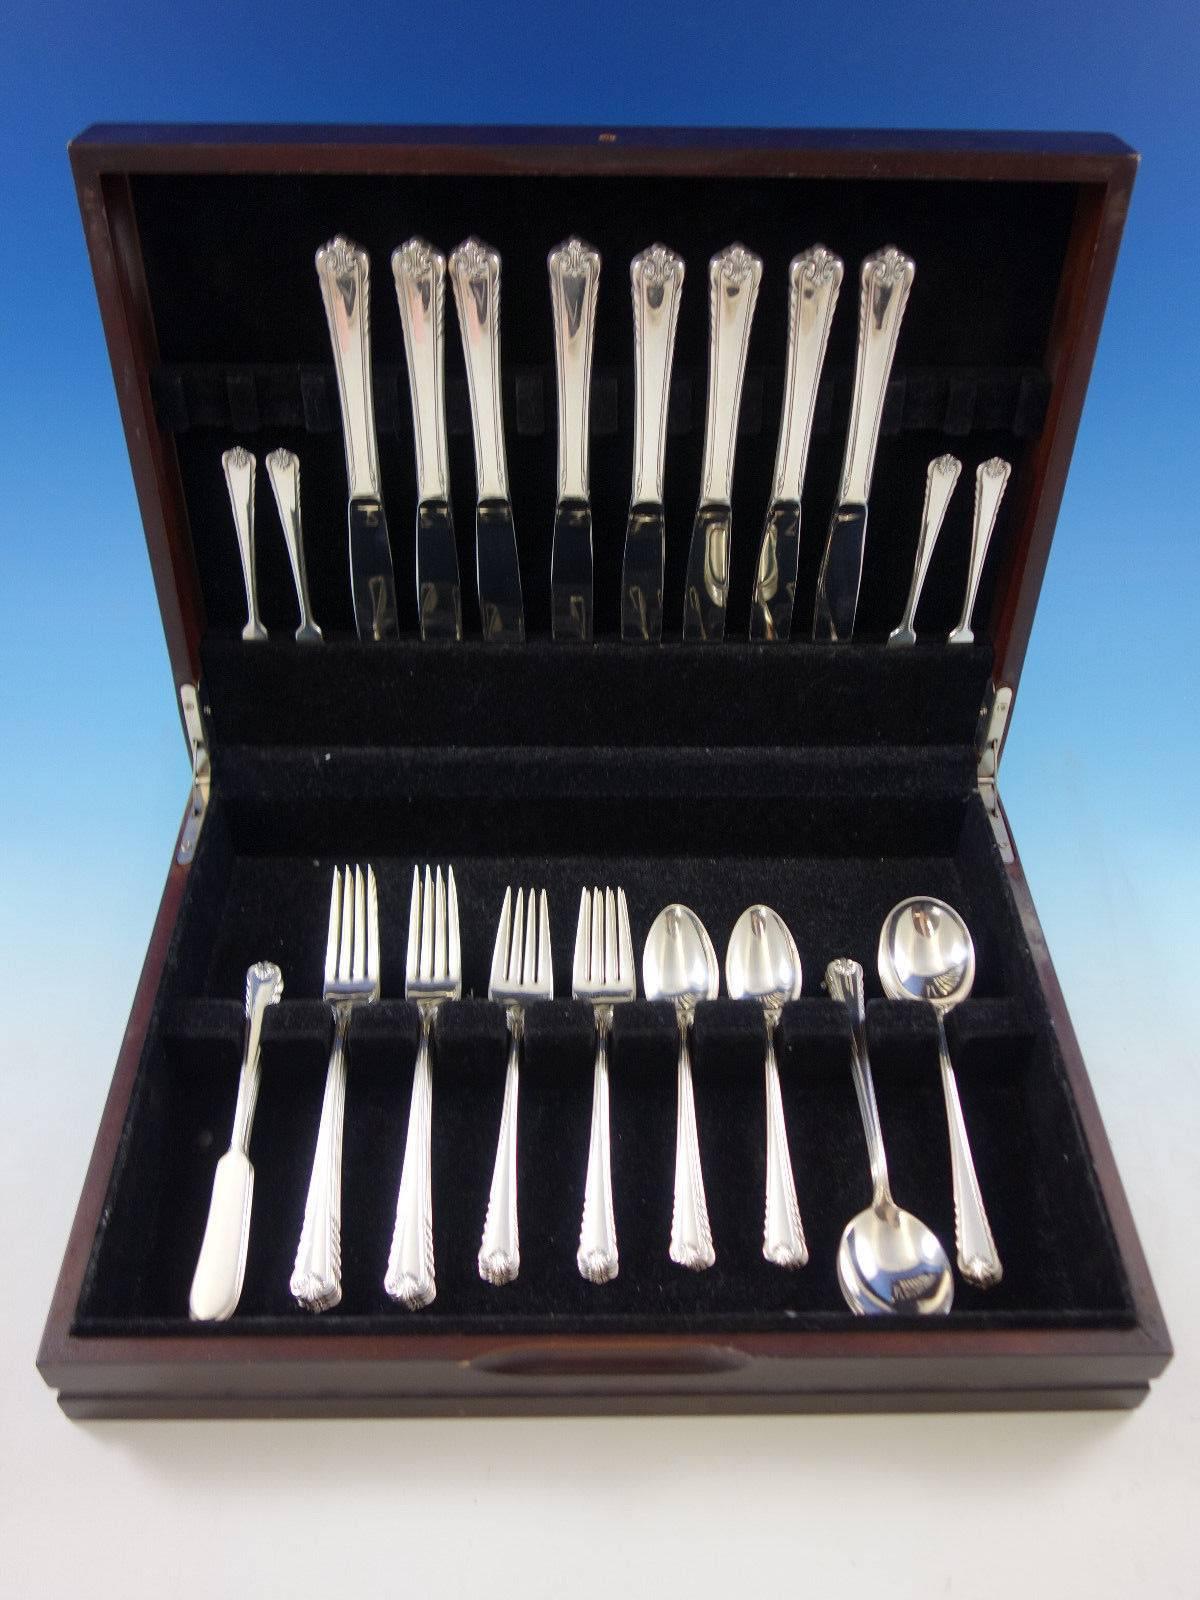 Moonbeam by International sterling silver flatware set, 48 pieces. This set includes:

Eight knives, 9 1/8